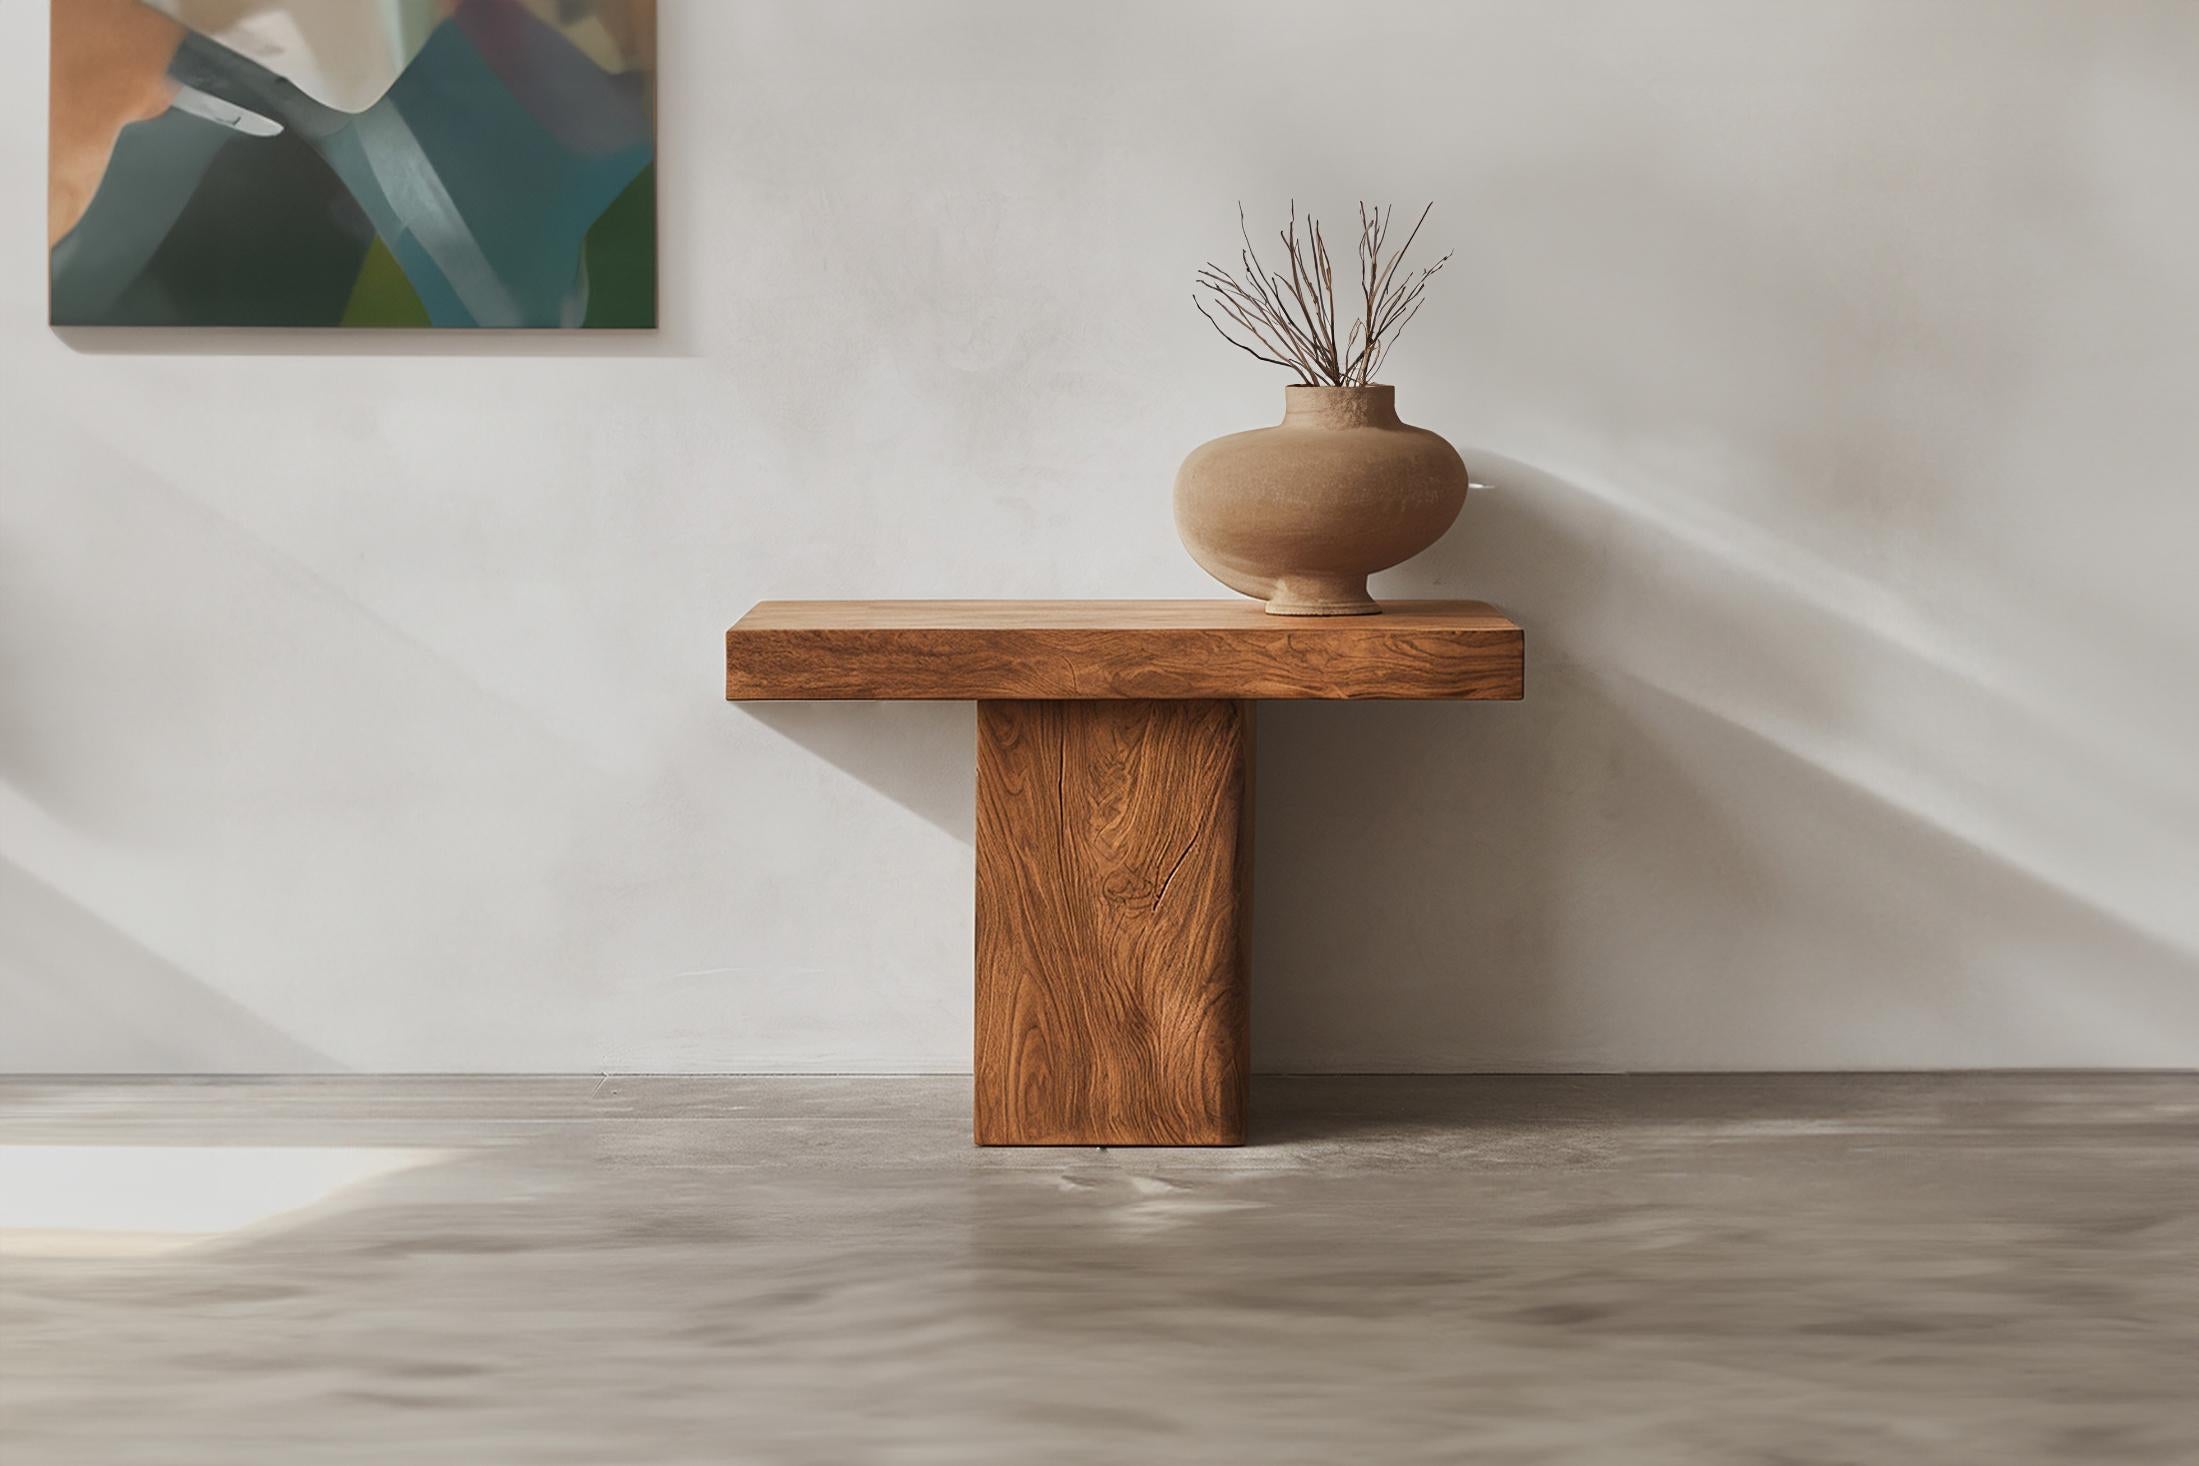 Minimalist Elefante Console 13, NONO Signature Oak, Balanced Structure—————————————————————
Elefante Collection: A Harmony of Design and Heritage by NONO

Crafting Elegance with a Modernist Touch

NONO, renowned for its decade-long journey in